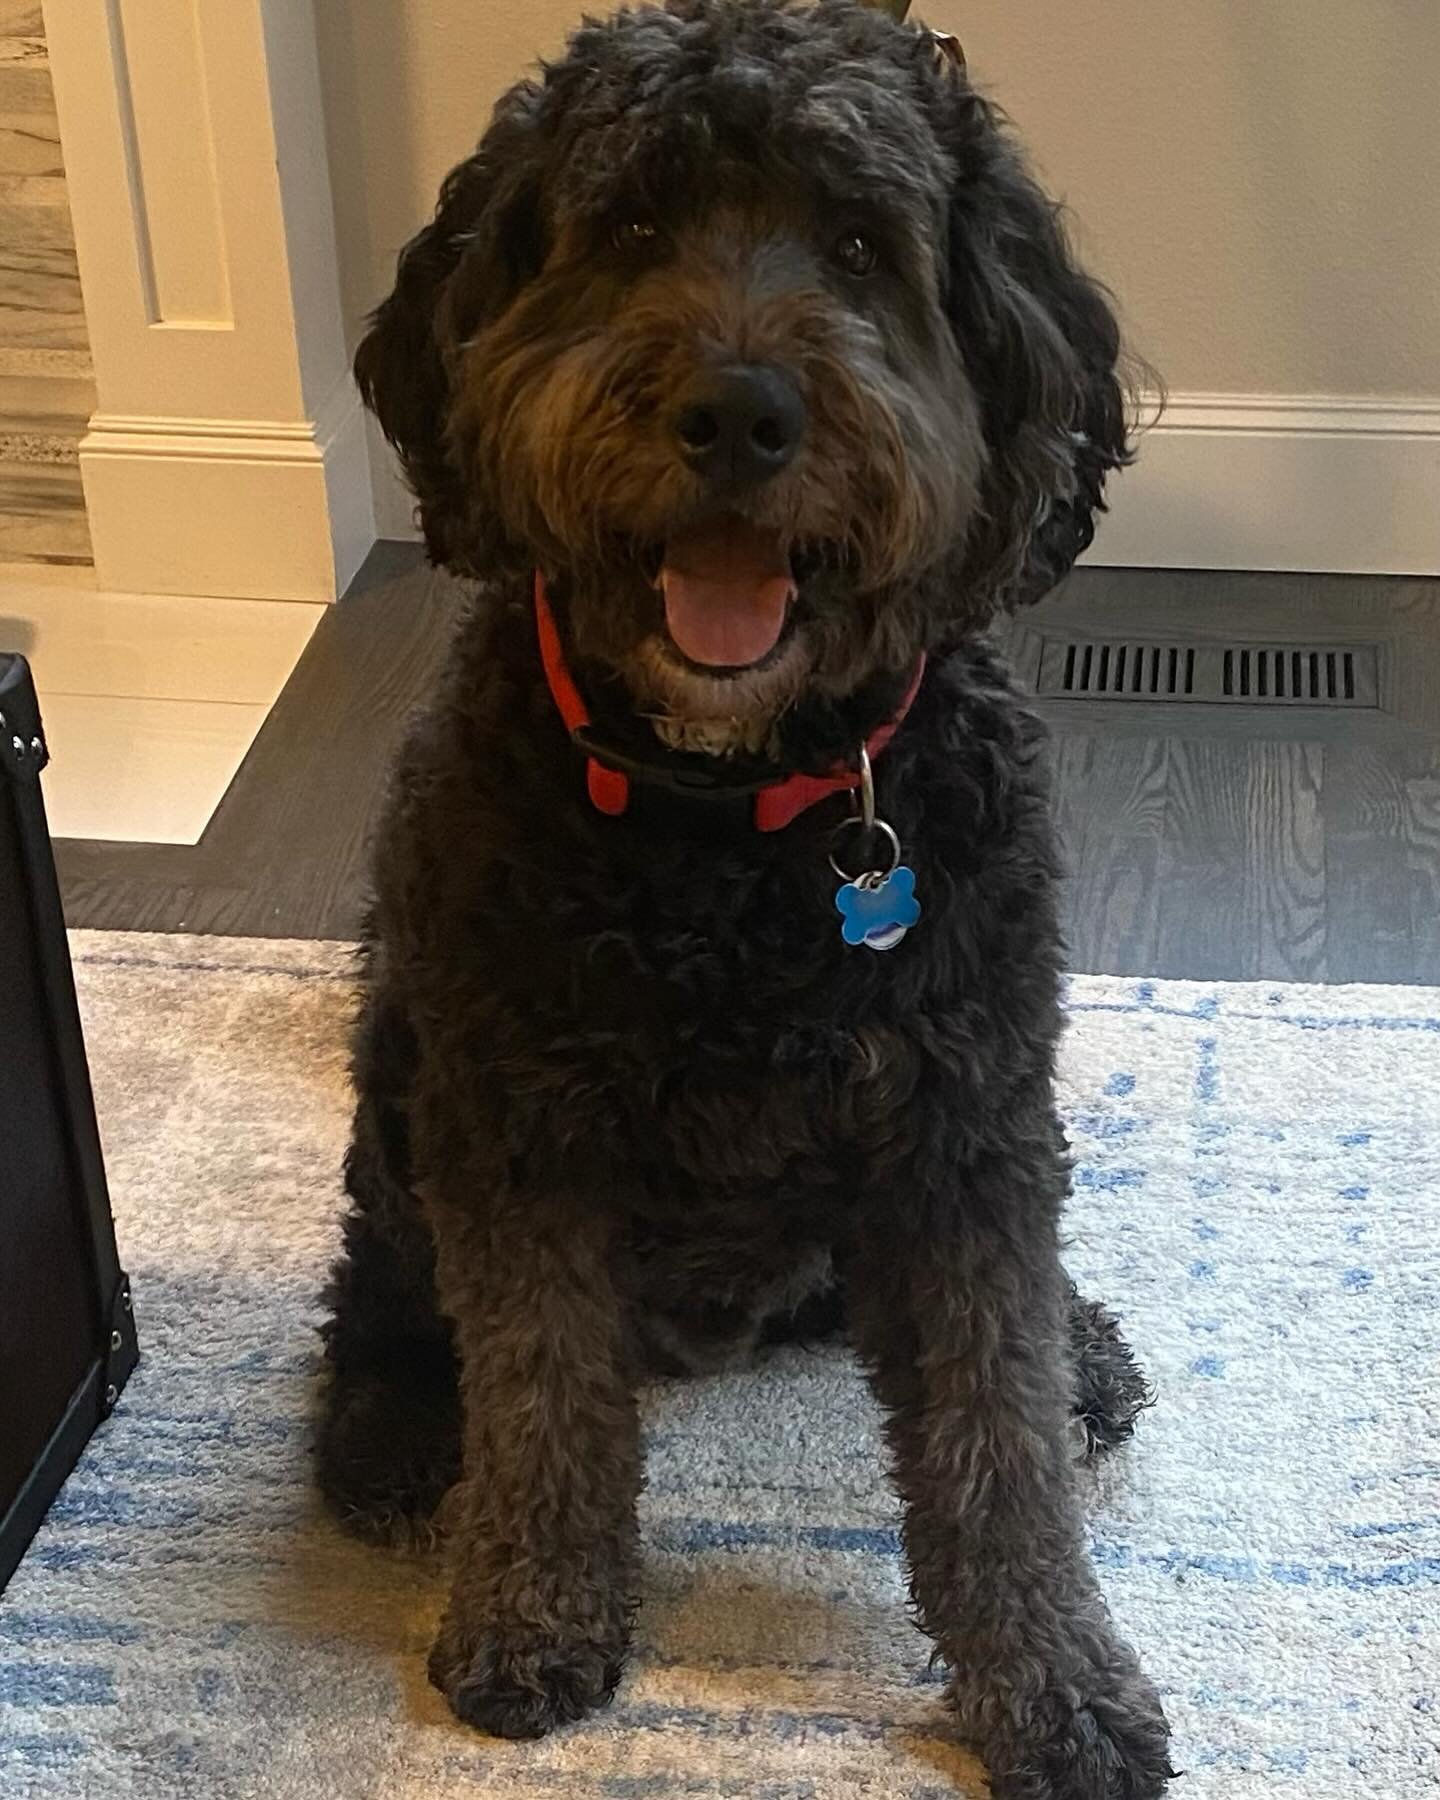 Say Hello to Cyrano! A 4 yr old Bernadoodle who reacts to new visitors to his home and on leash when seeing dogs in the neighborhood. Educated owners on how to best support, lead and motivate him to work and follow clear instructions to ease his emot